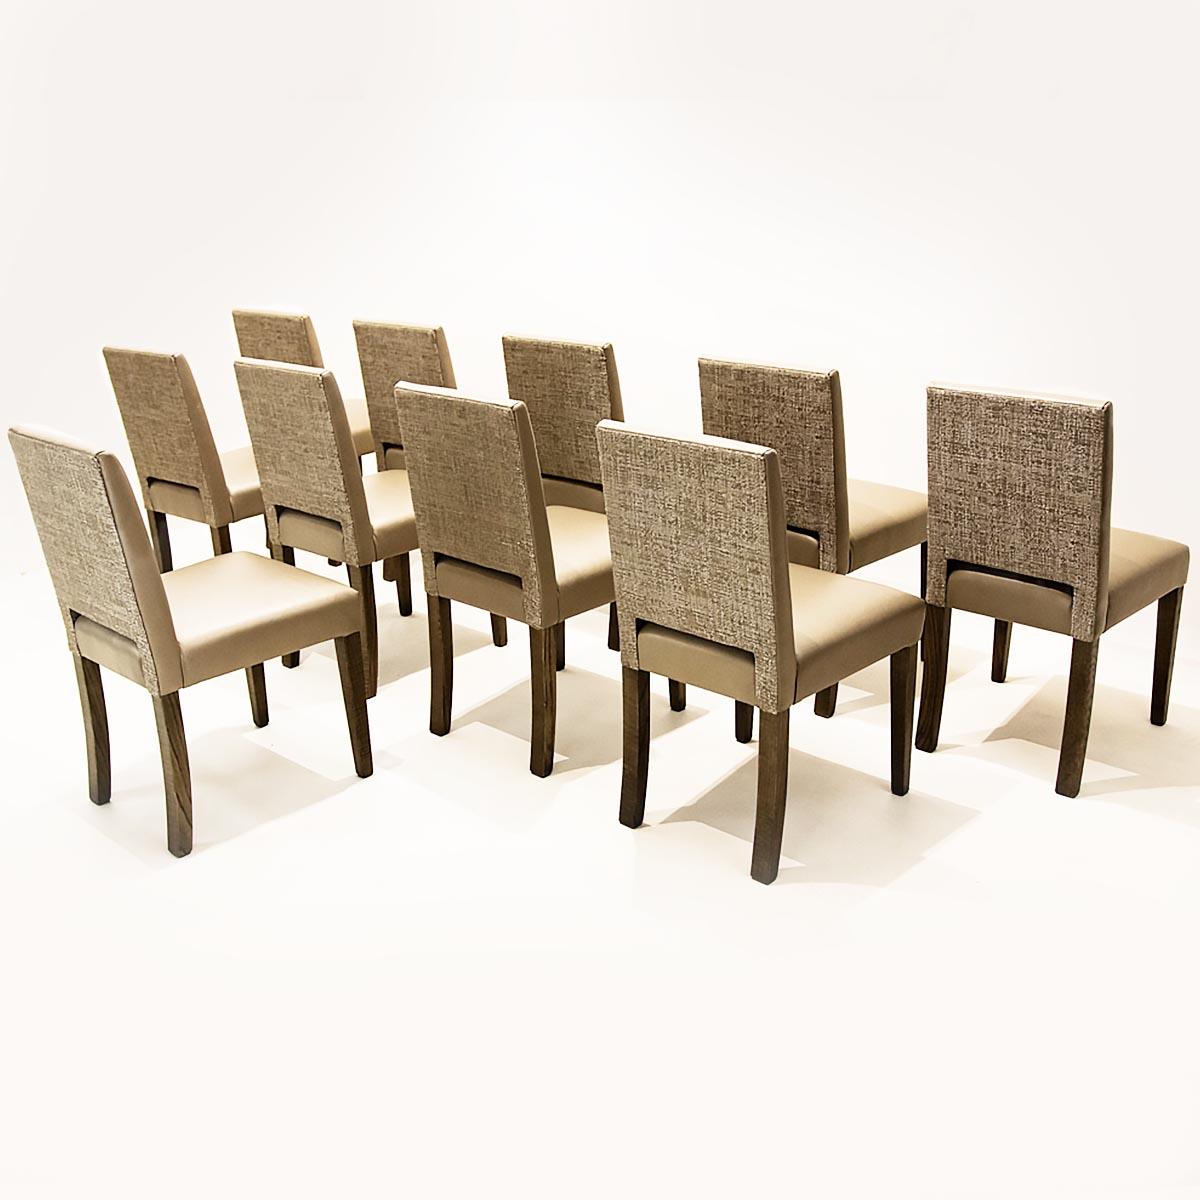 Large 10 Seat Contemporary Dining Set with Bespoke Macassar Table and 10 Chairs For Sale 5